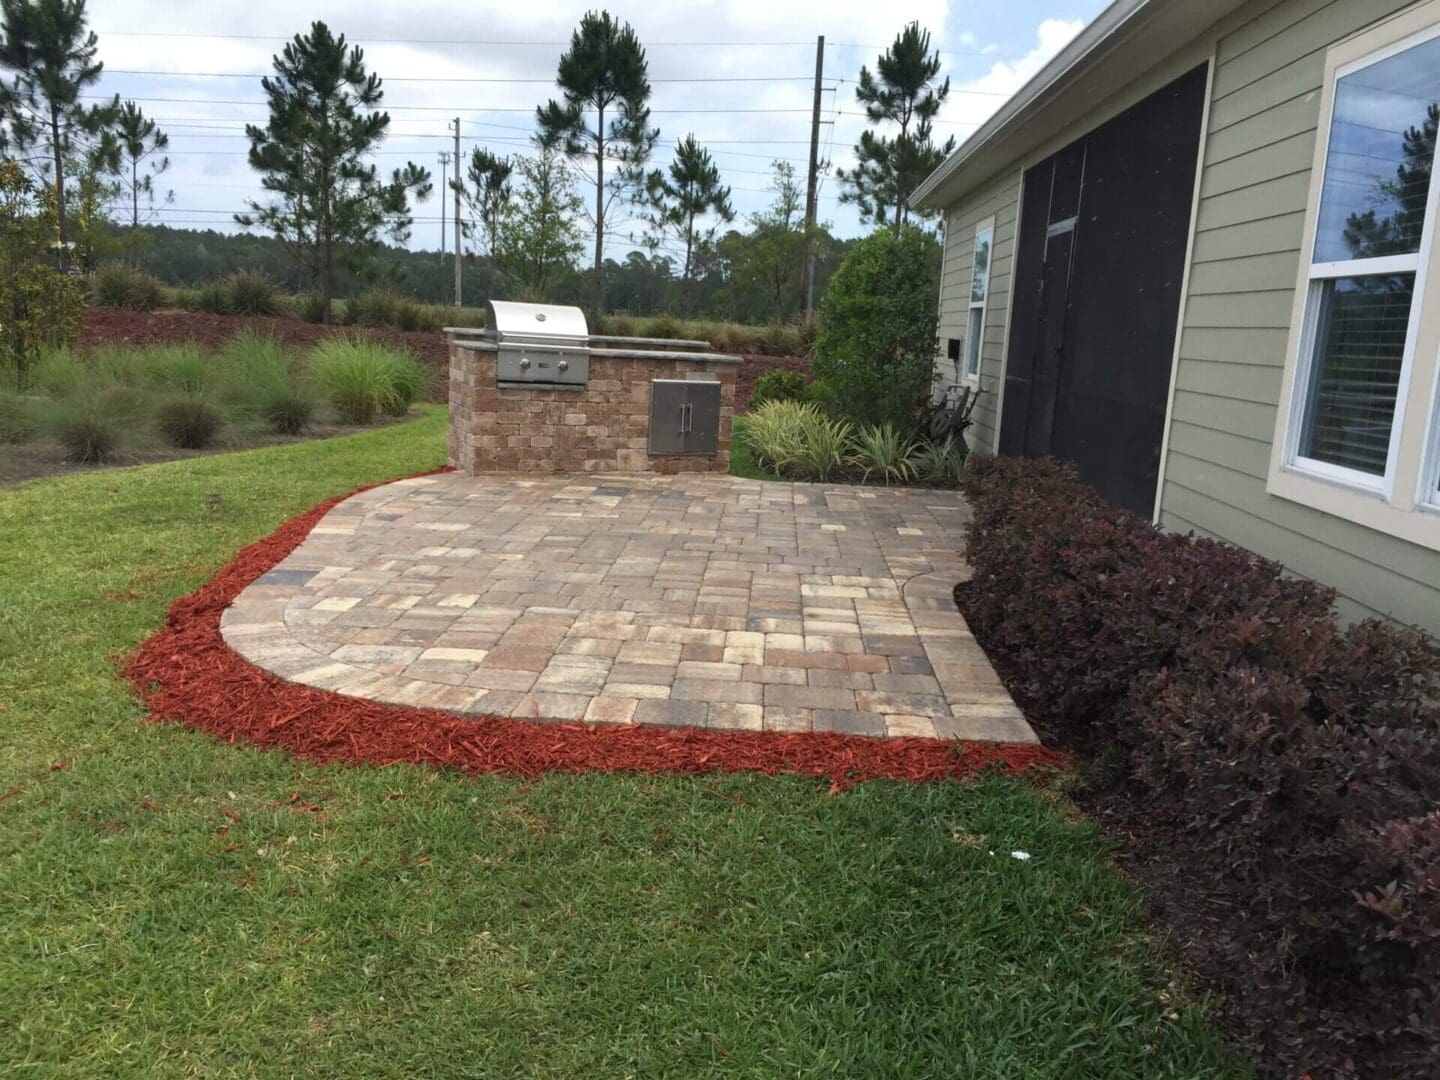 Patio area in North East Florida with brick paving and an outdoor grill, bordered by red mulch and shrubbery next to a building.